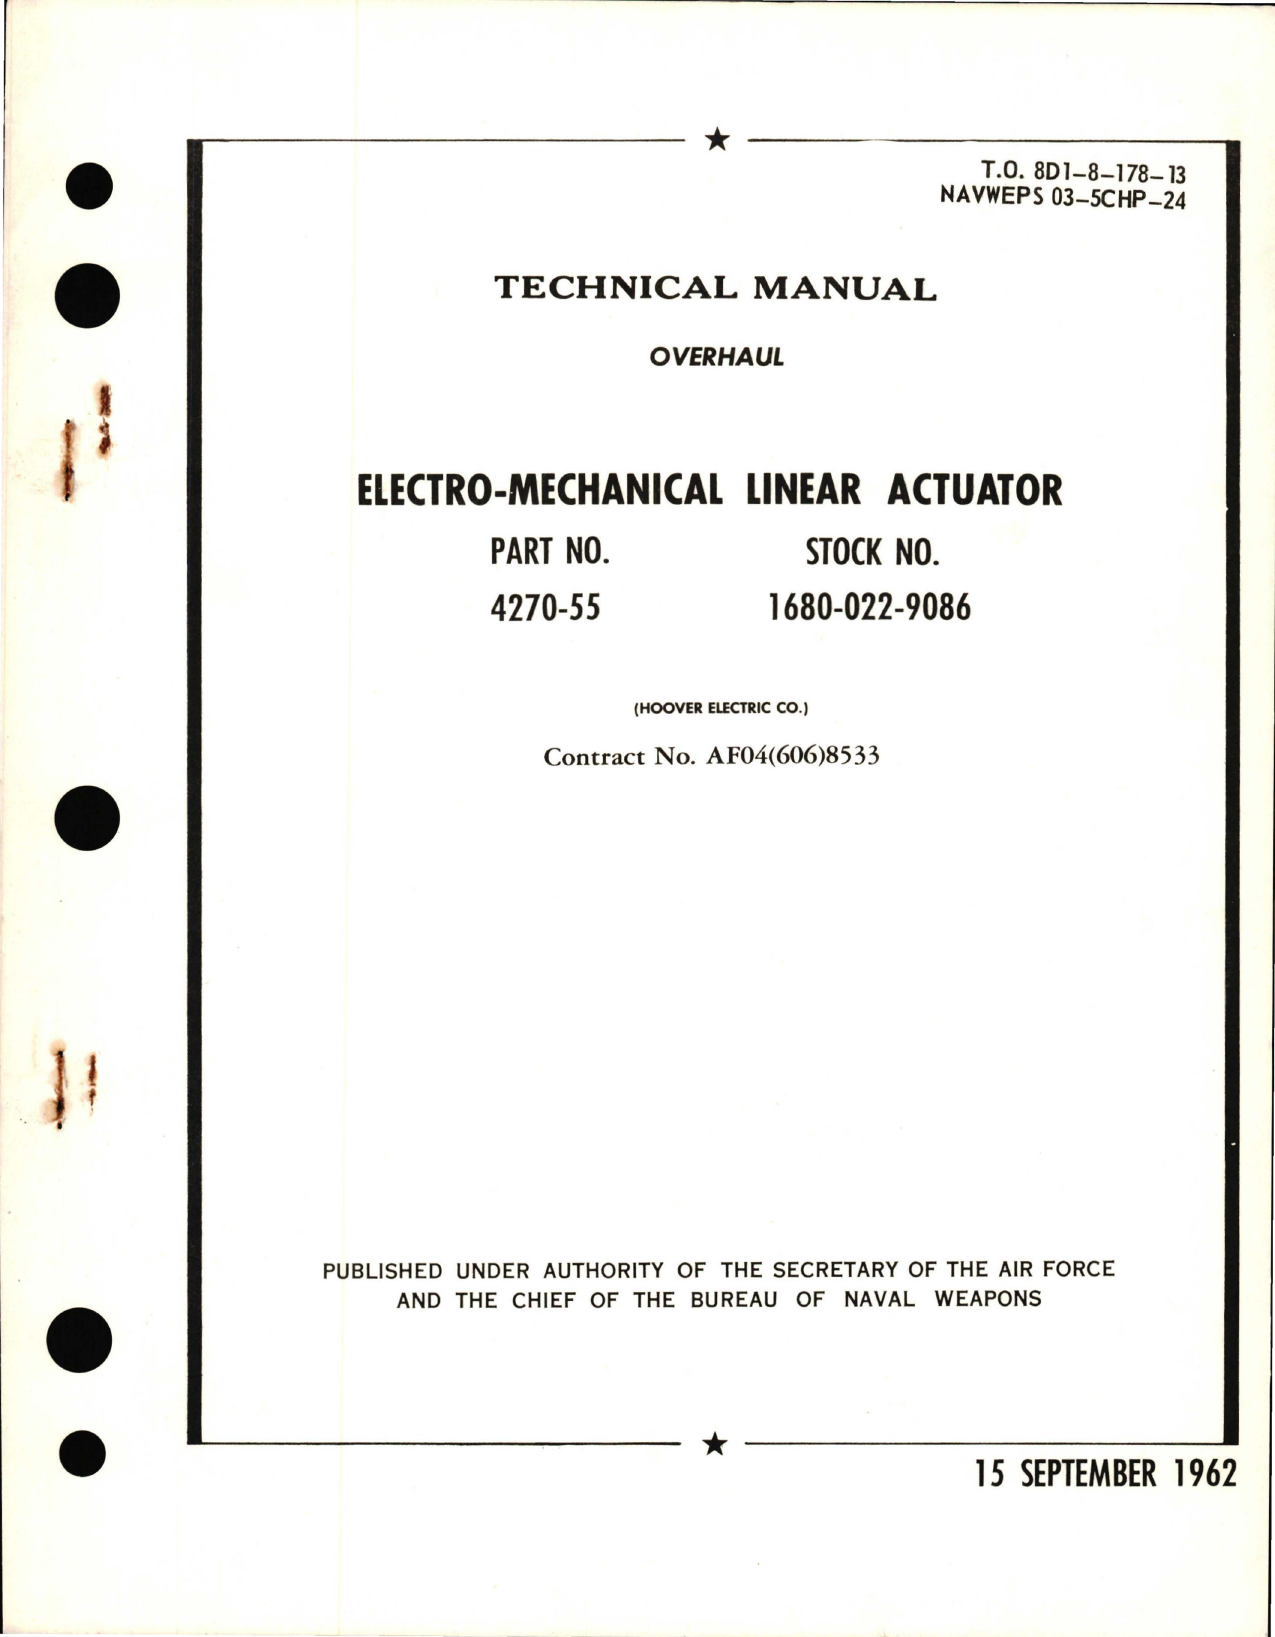 Sample page 1 from AirCorps Library document: Overhaul for Electro-Mechanical Linear Actuator Part 4270-55